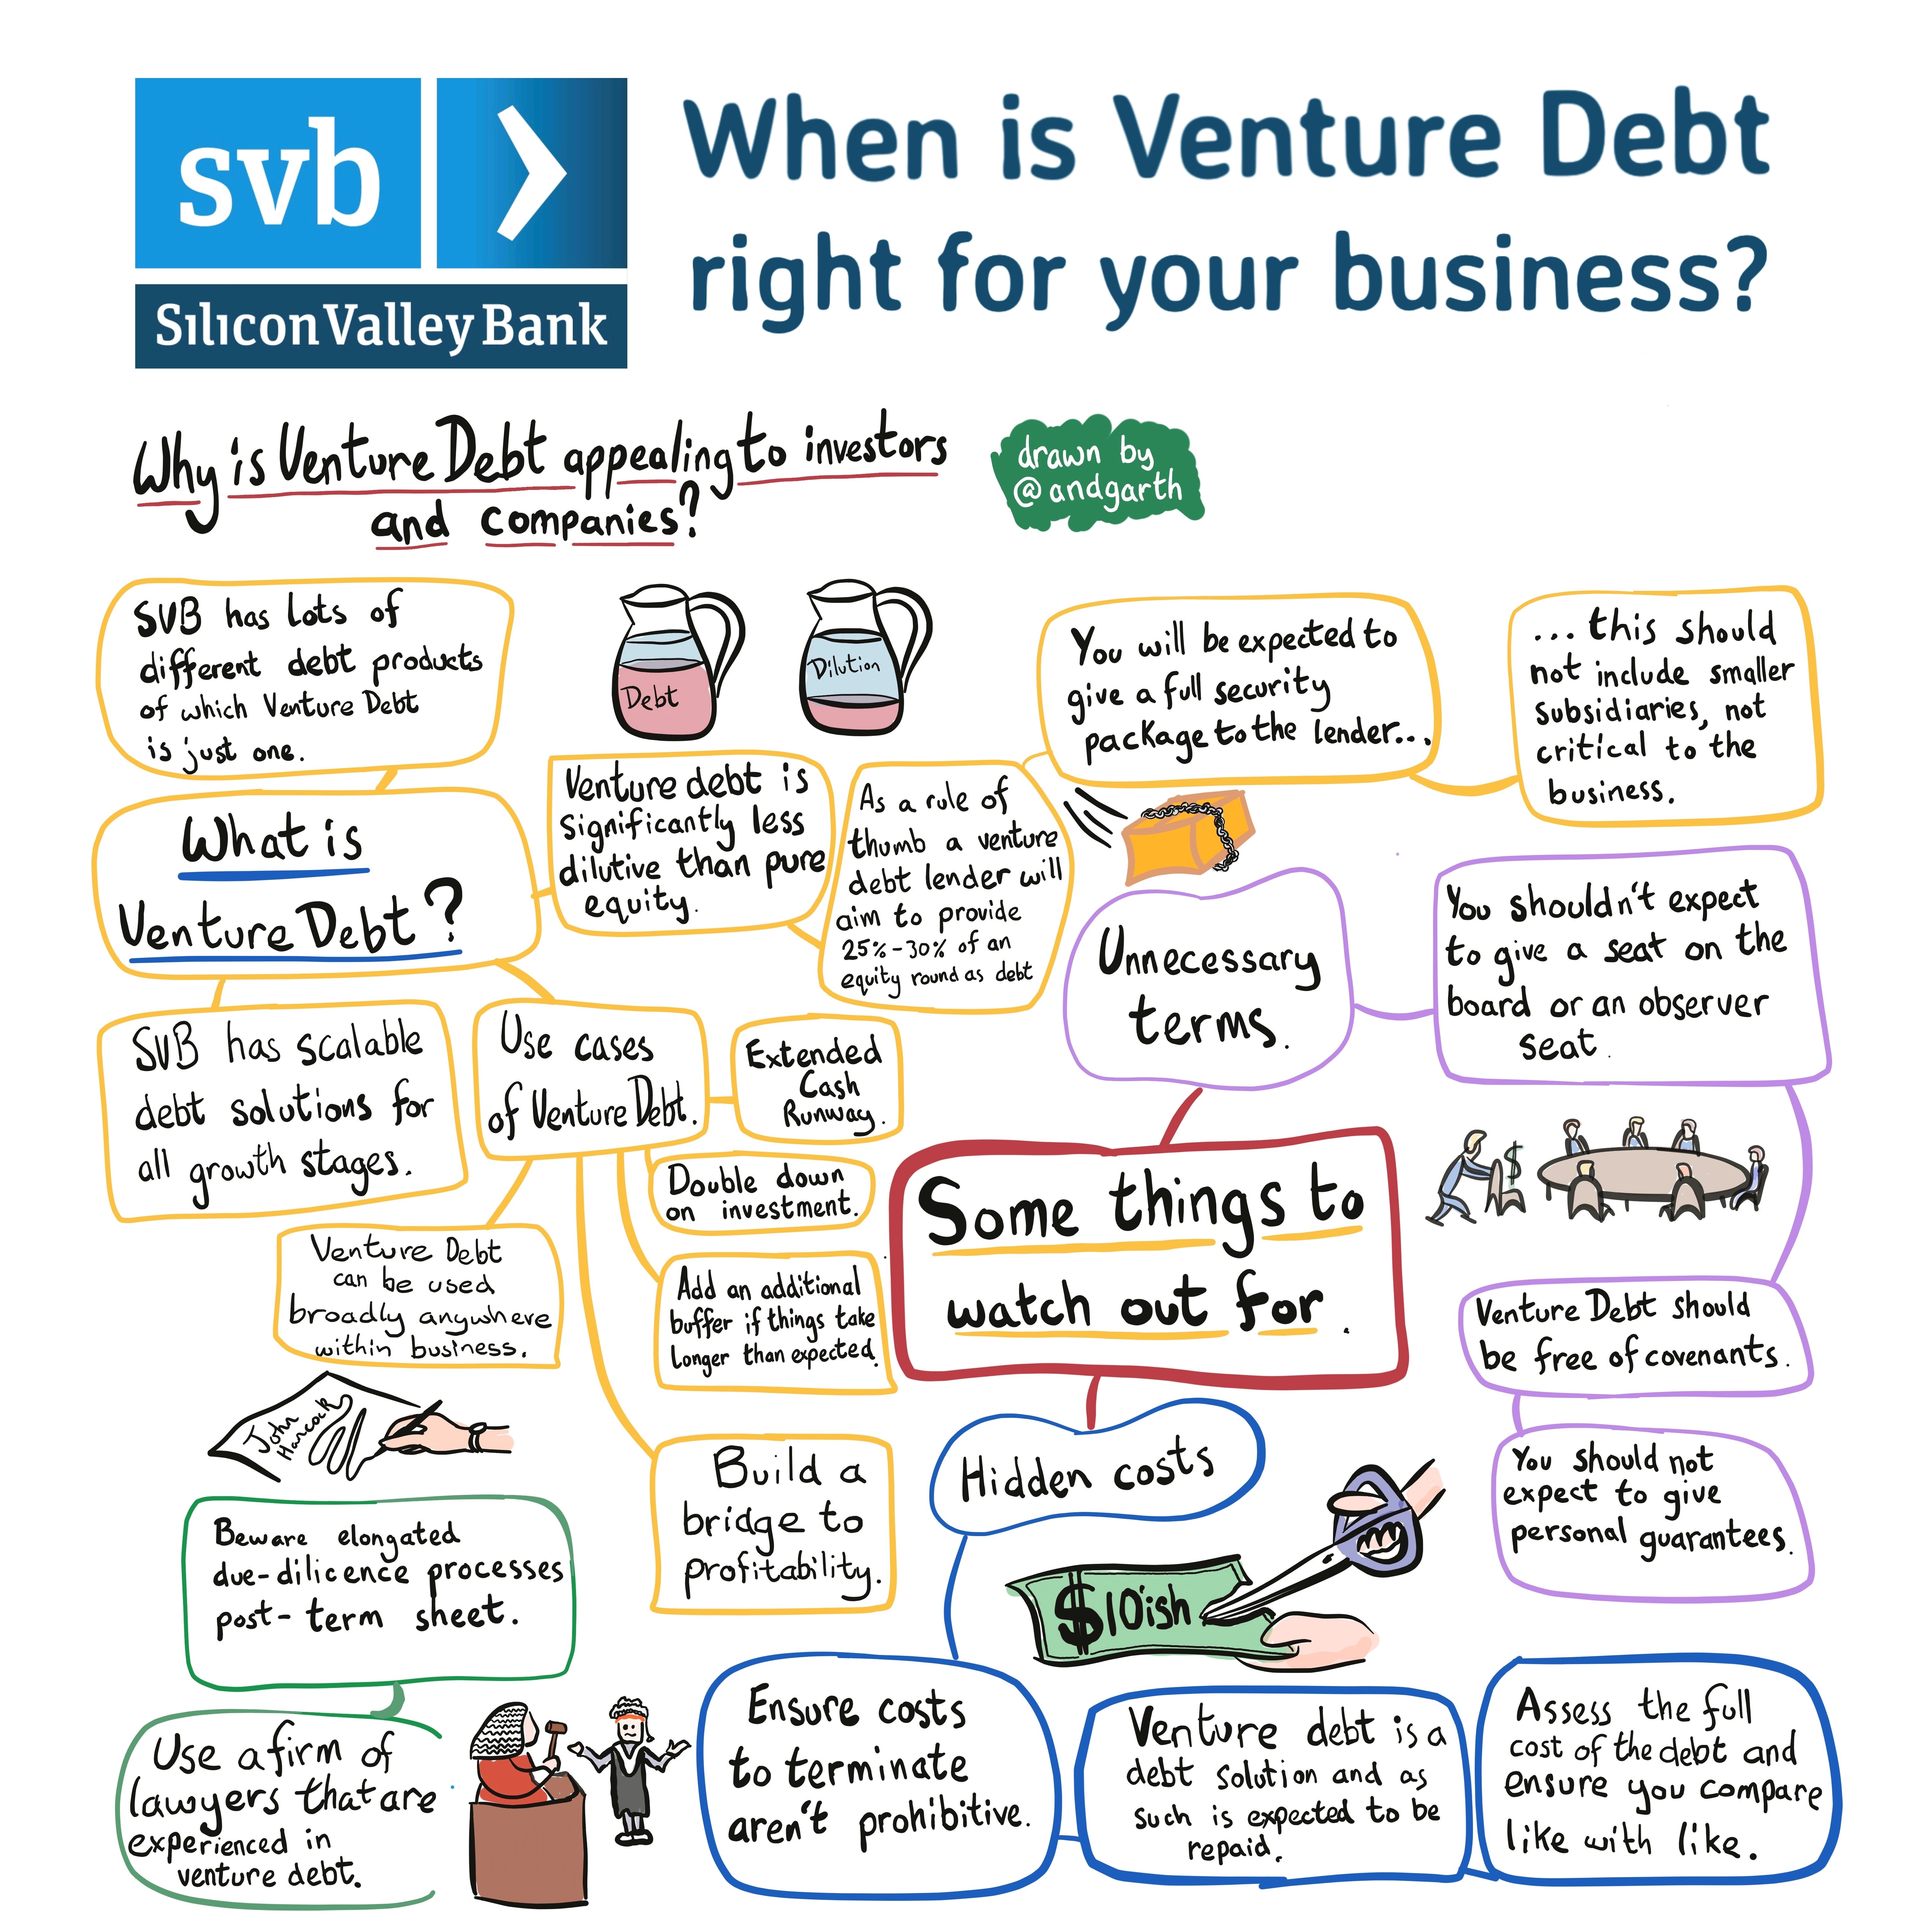 What are the warning signs in a venture debt deal?